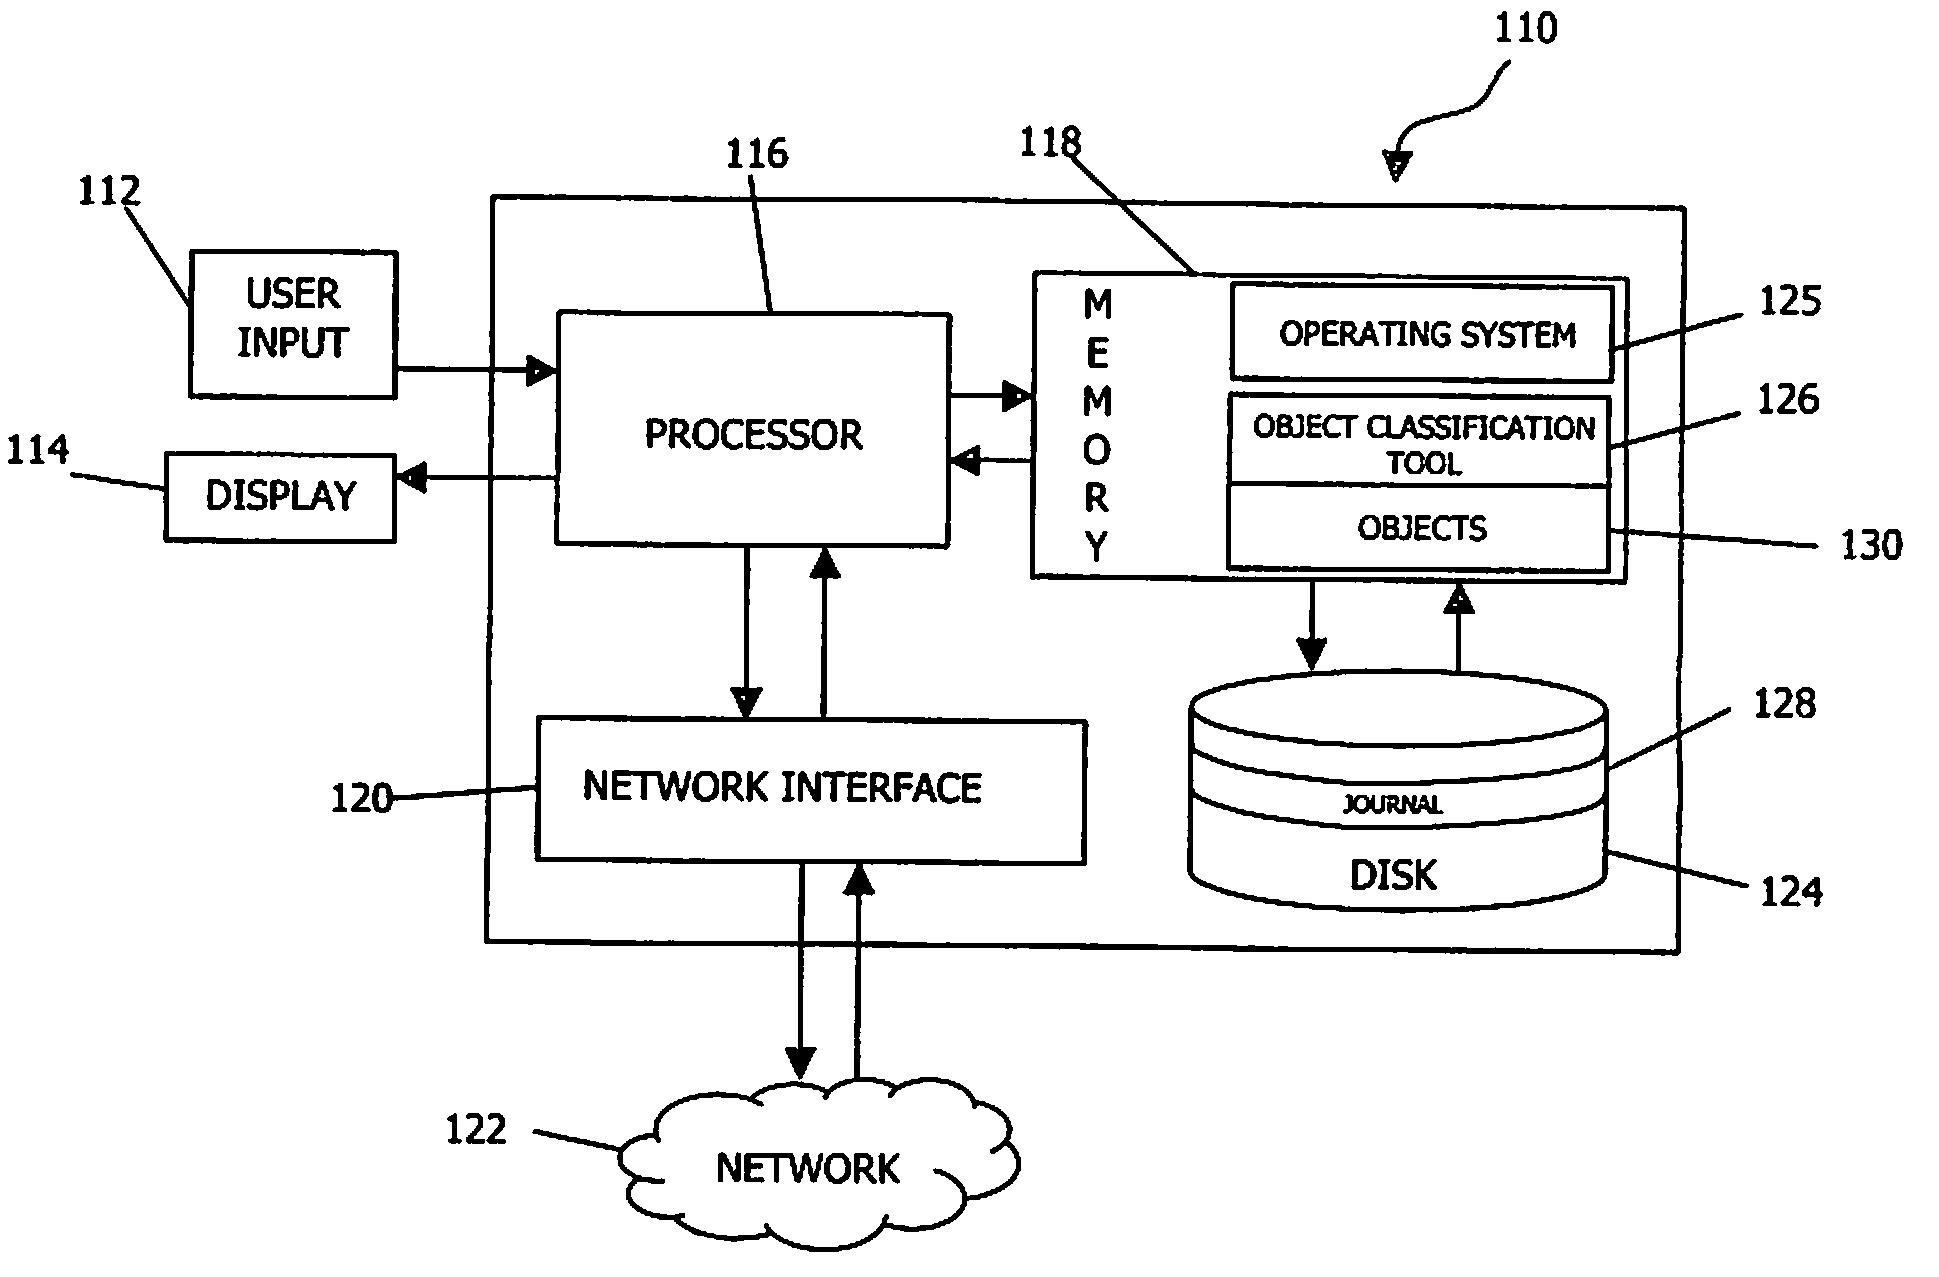 Logical Classification of Objects on a Computer System